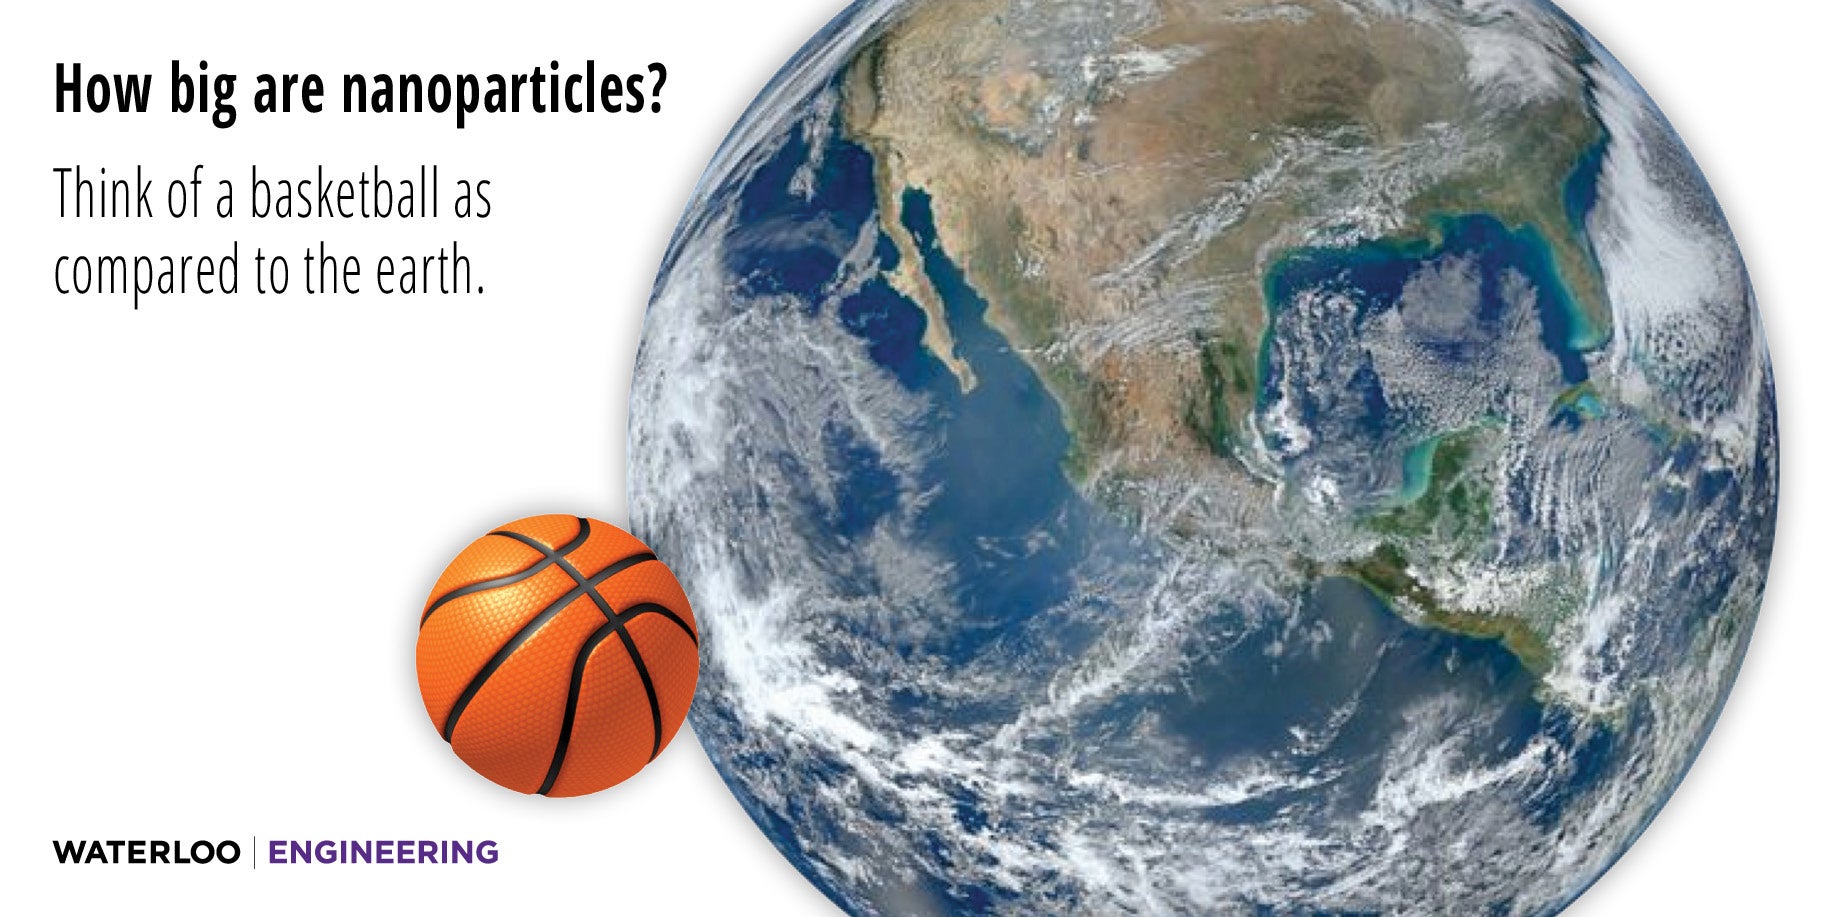 How big are nanoparticles - think of a basketball as compared to the earth